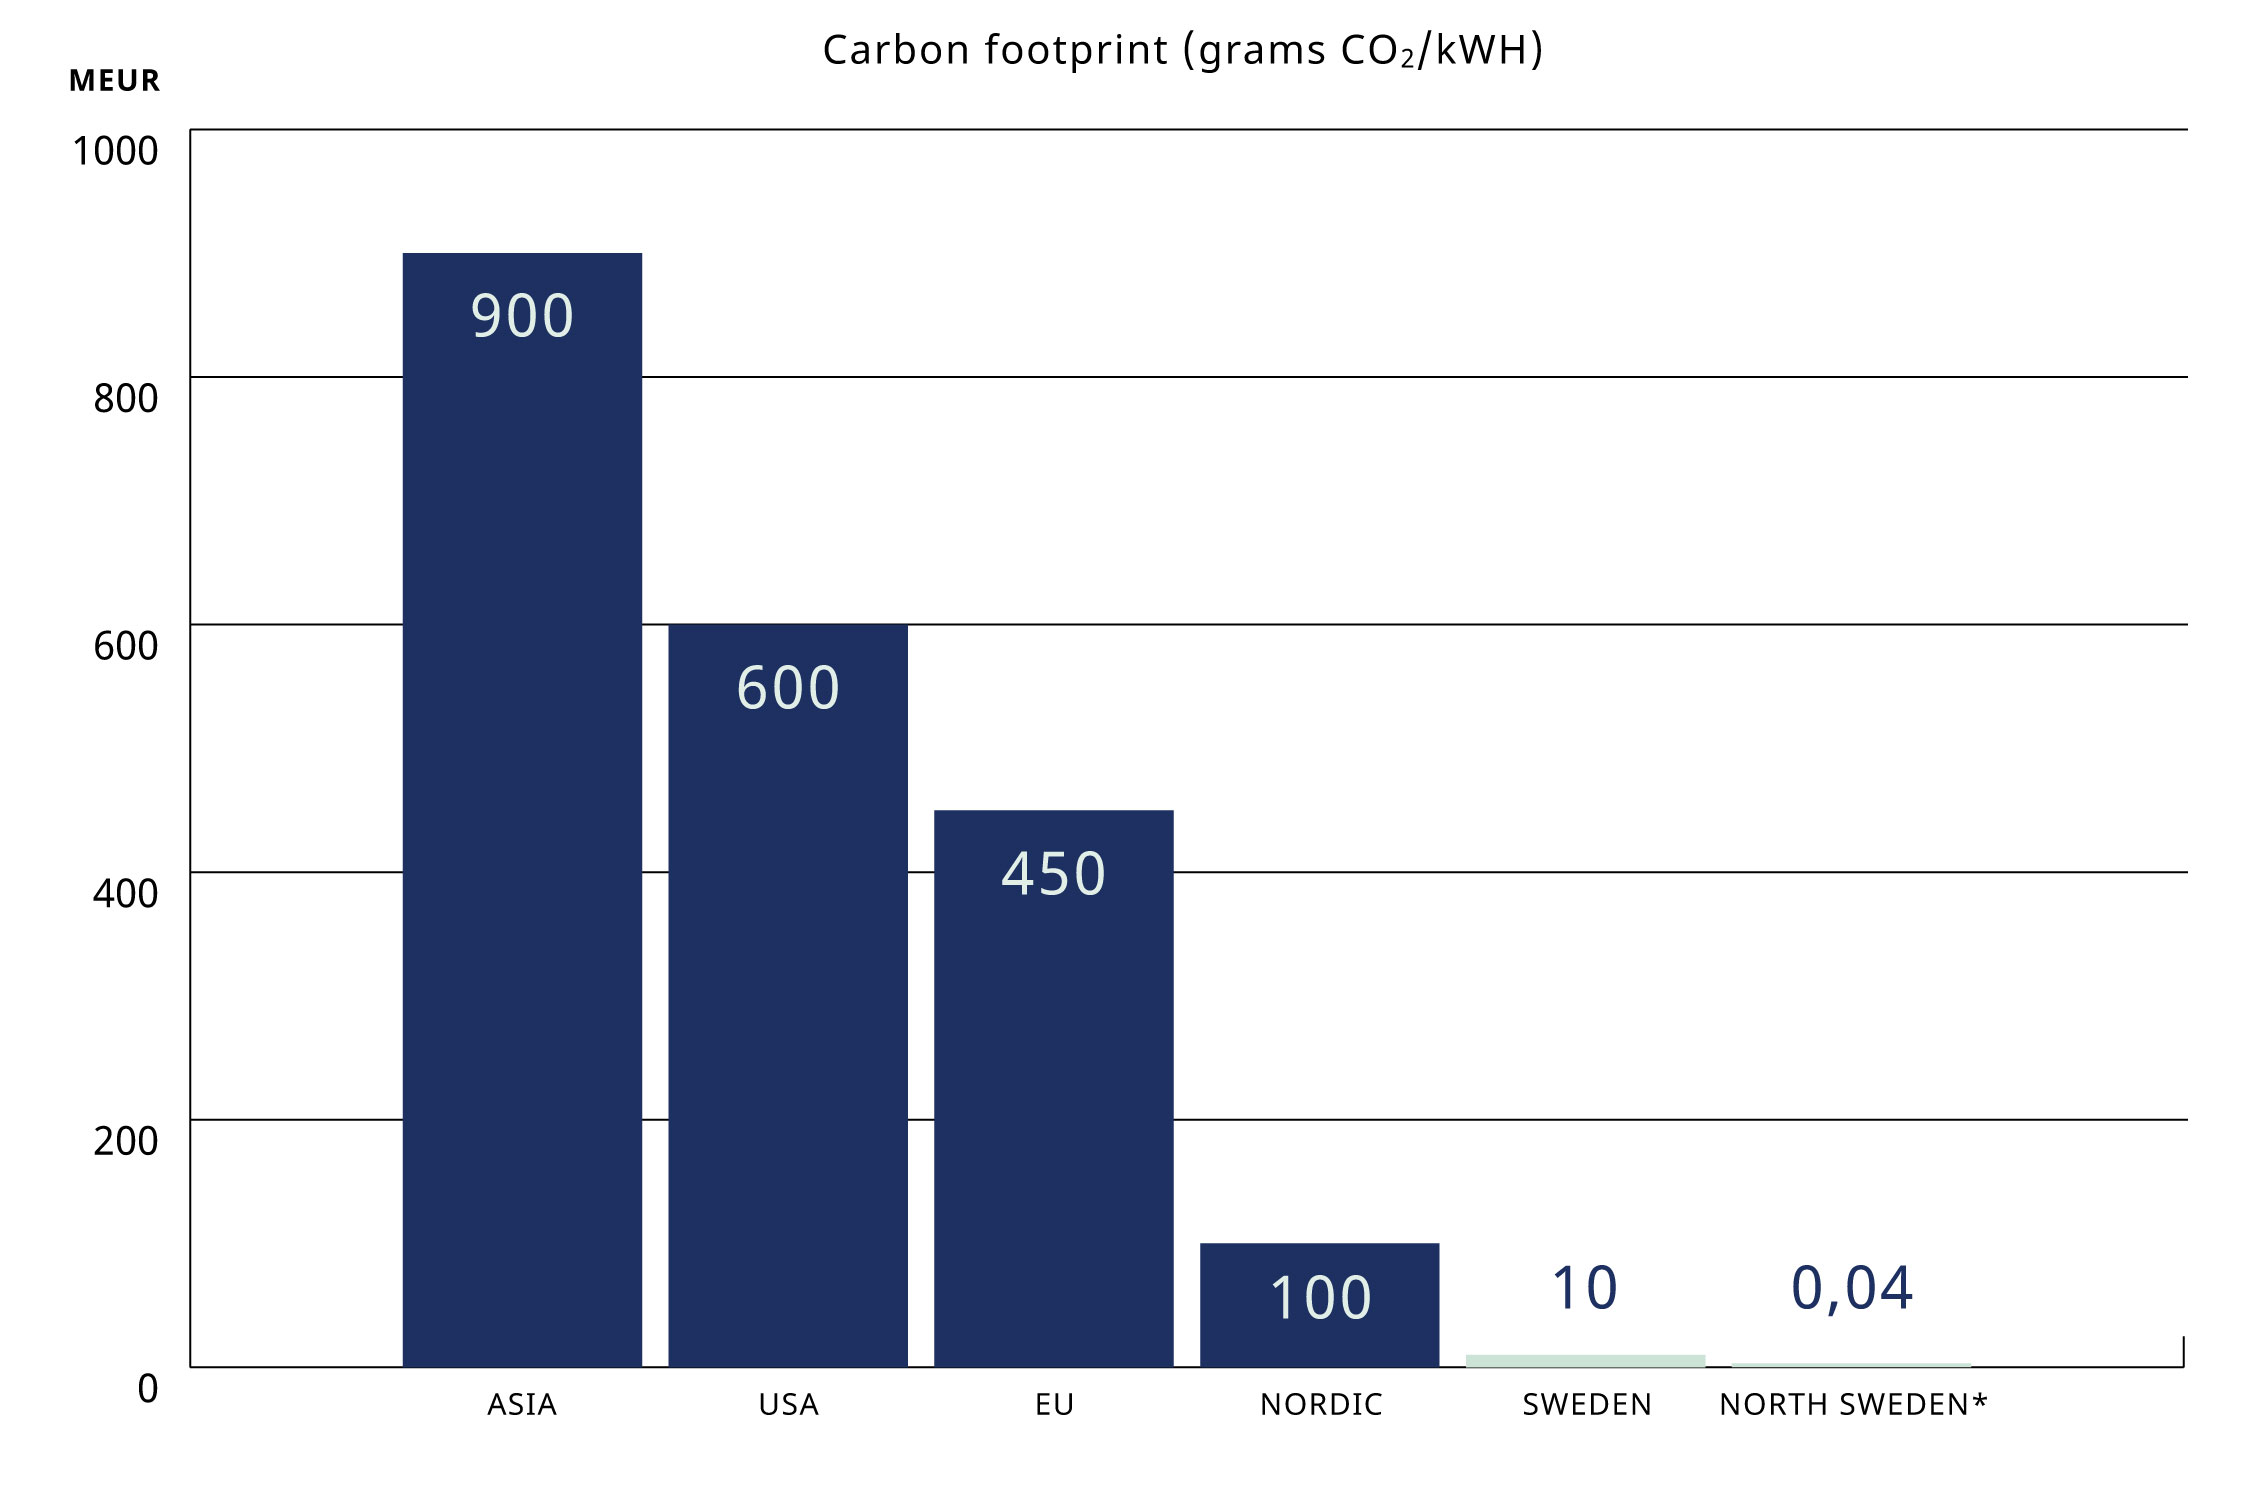 Carbon footprint in grams CO2 per kWh of power generation in 2014. </br>Source: European Environment Agency and Vattenfall.</br>*EPD Vattenfall Hydropower. 